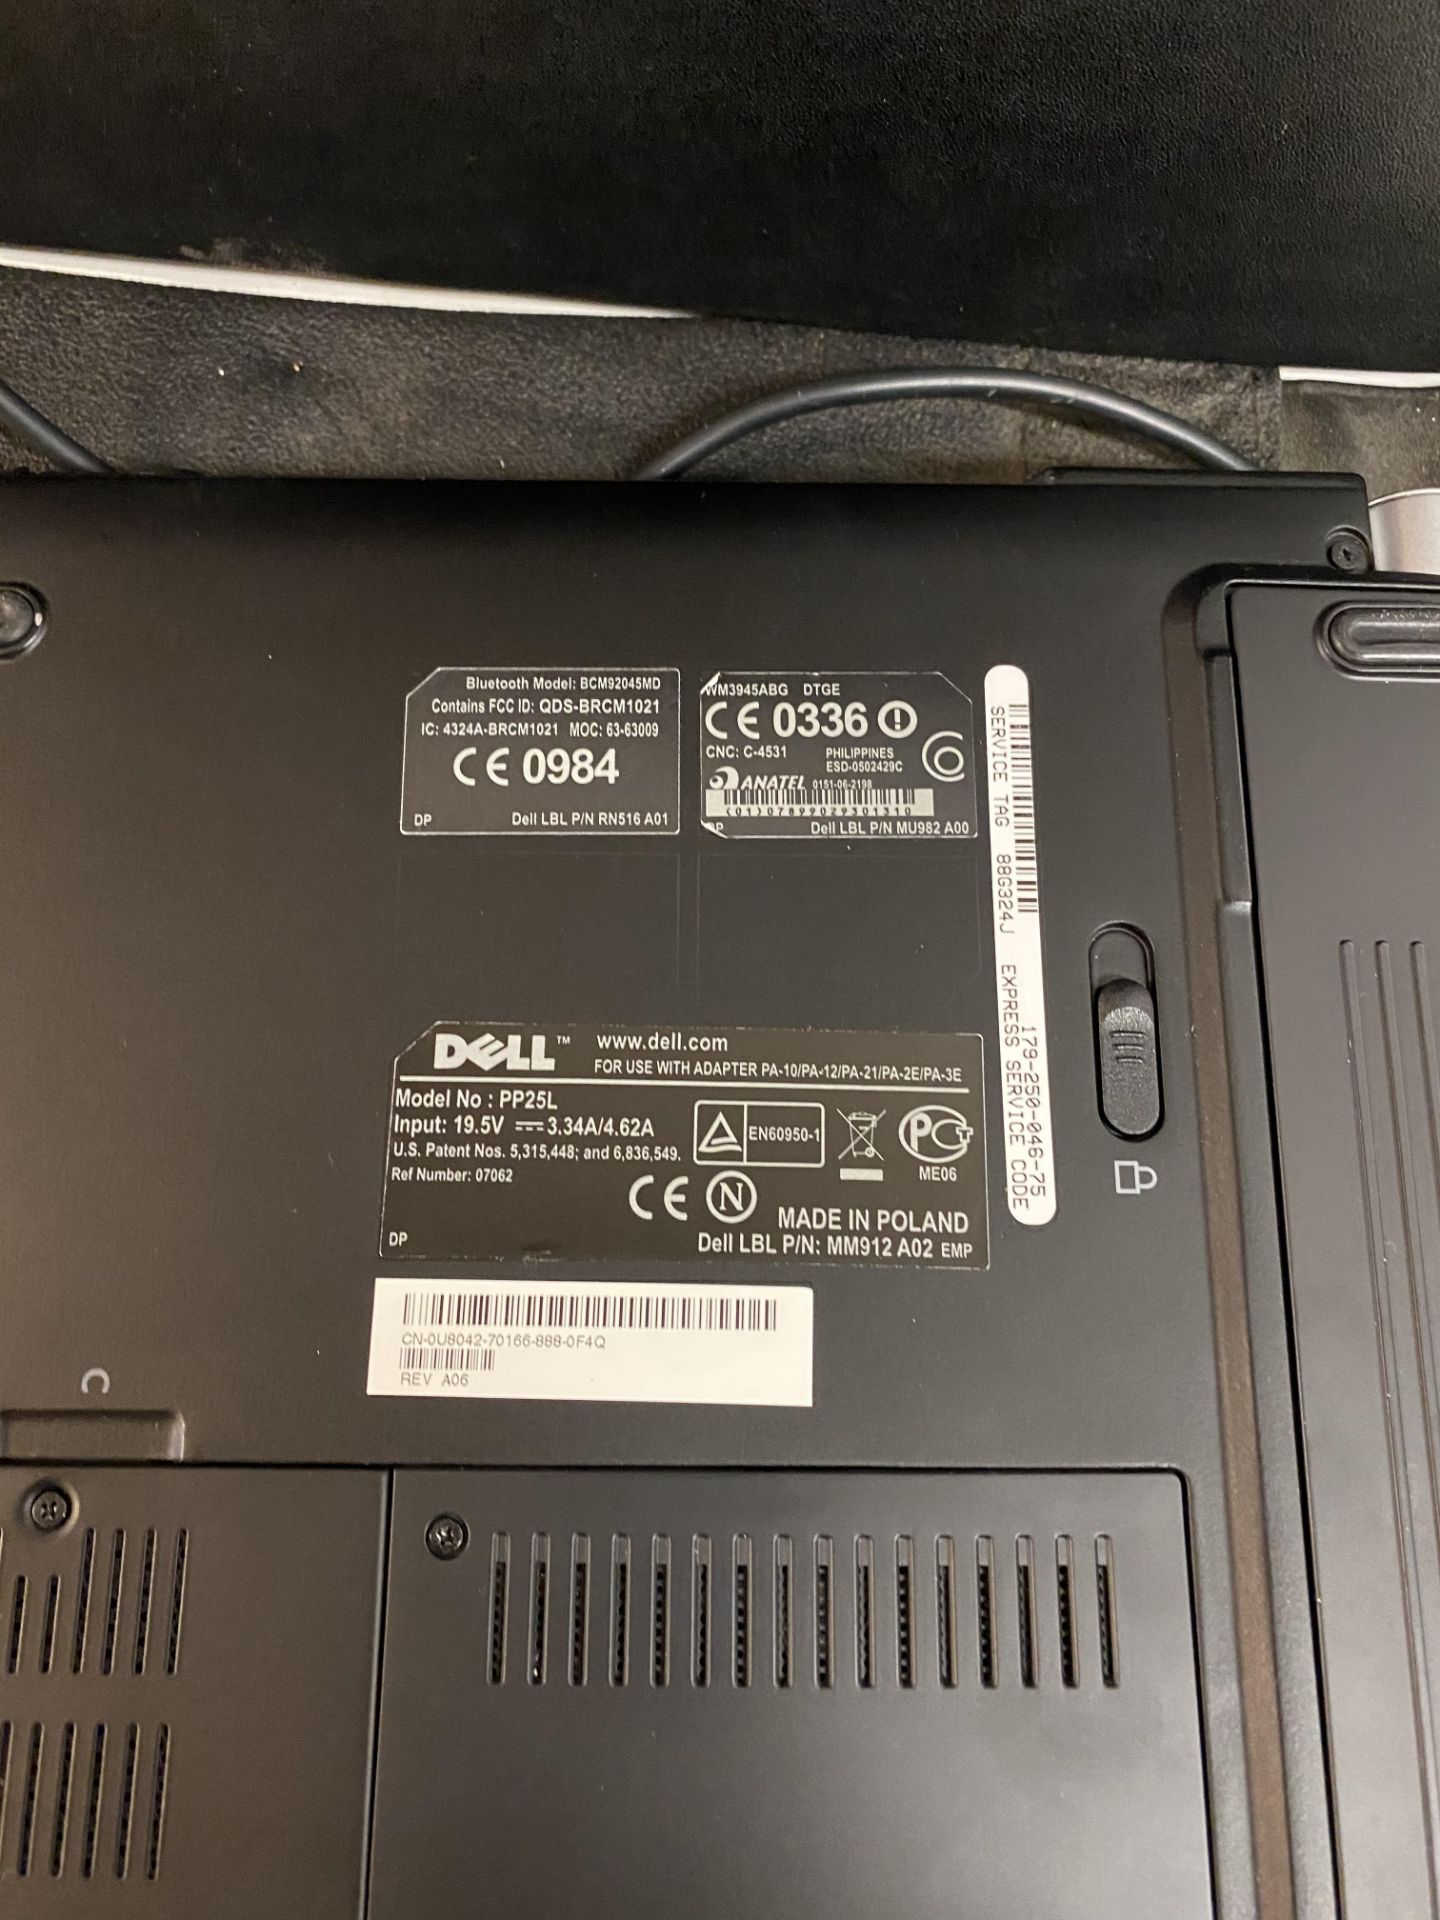 Dell XPS M1330 Laptop (may need new hard drive, see images) - Image 6 of 7